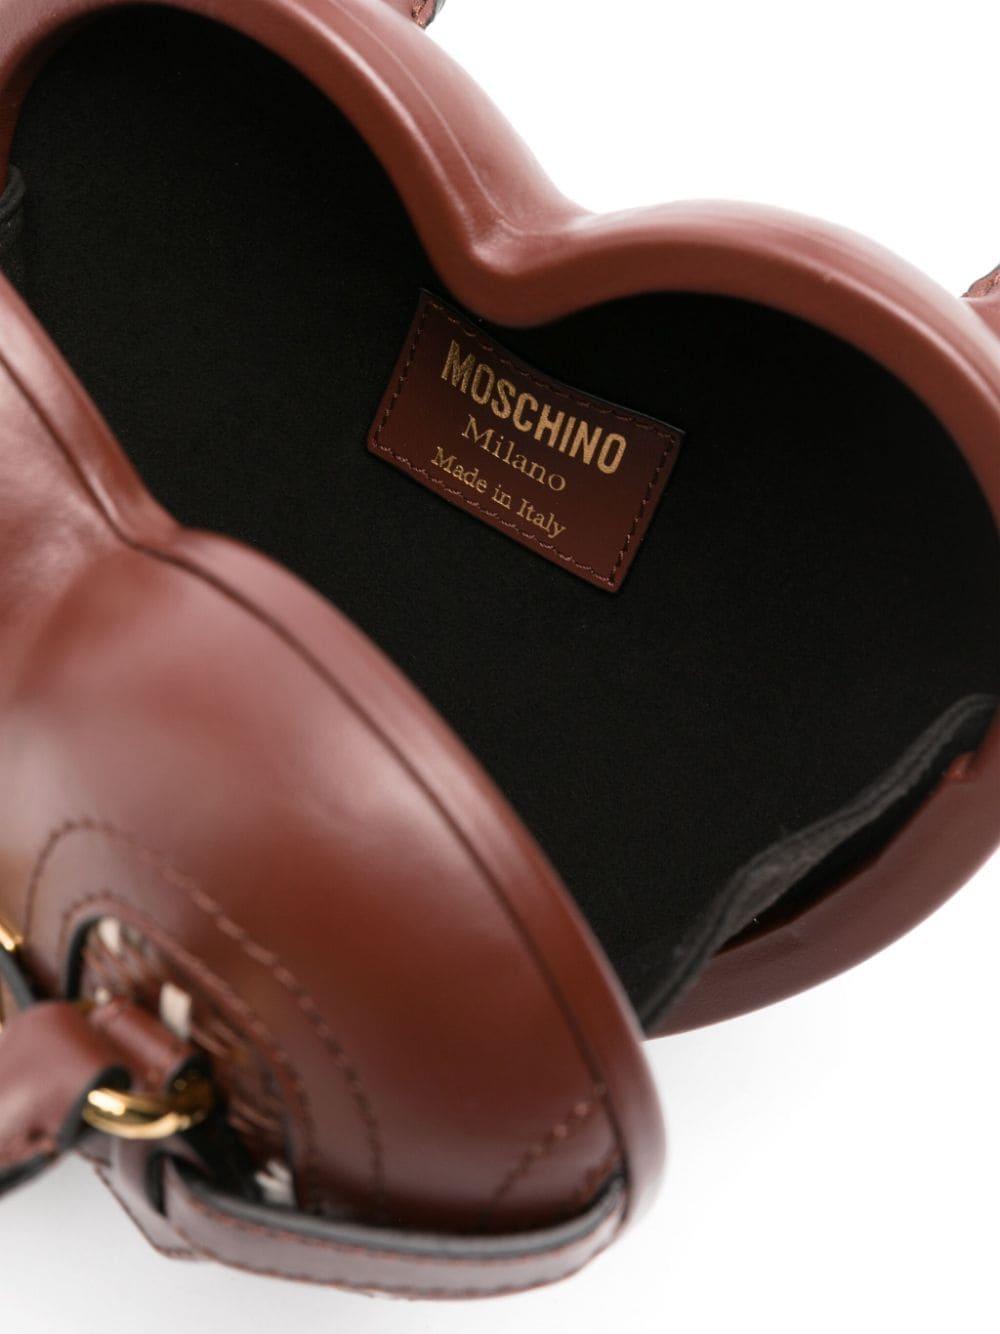 Moschino Heart-shaped Leather Tote Bag in Brown